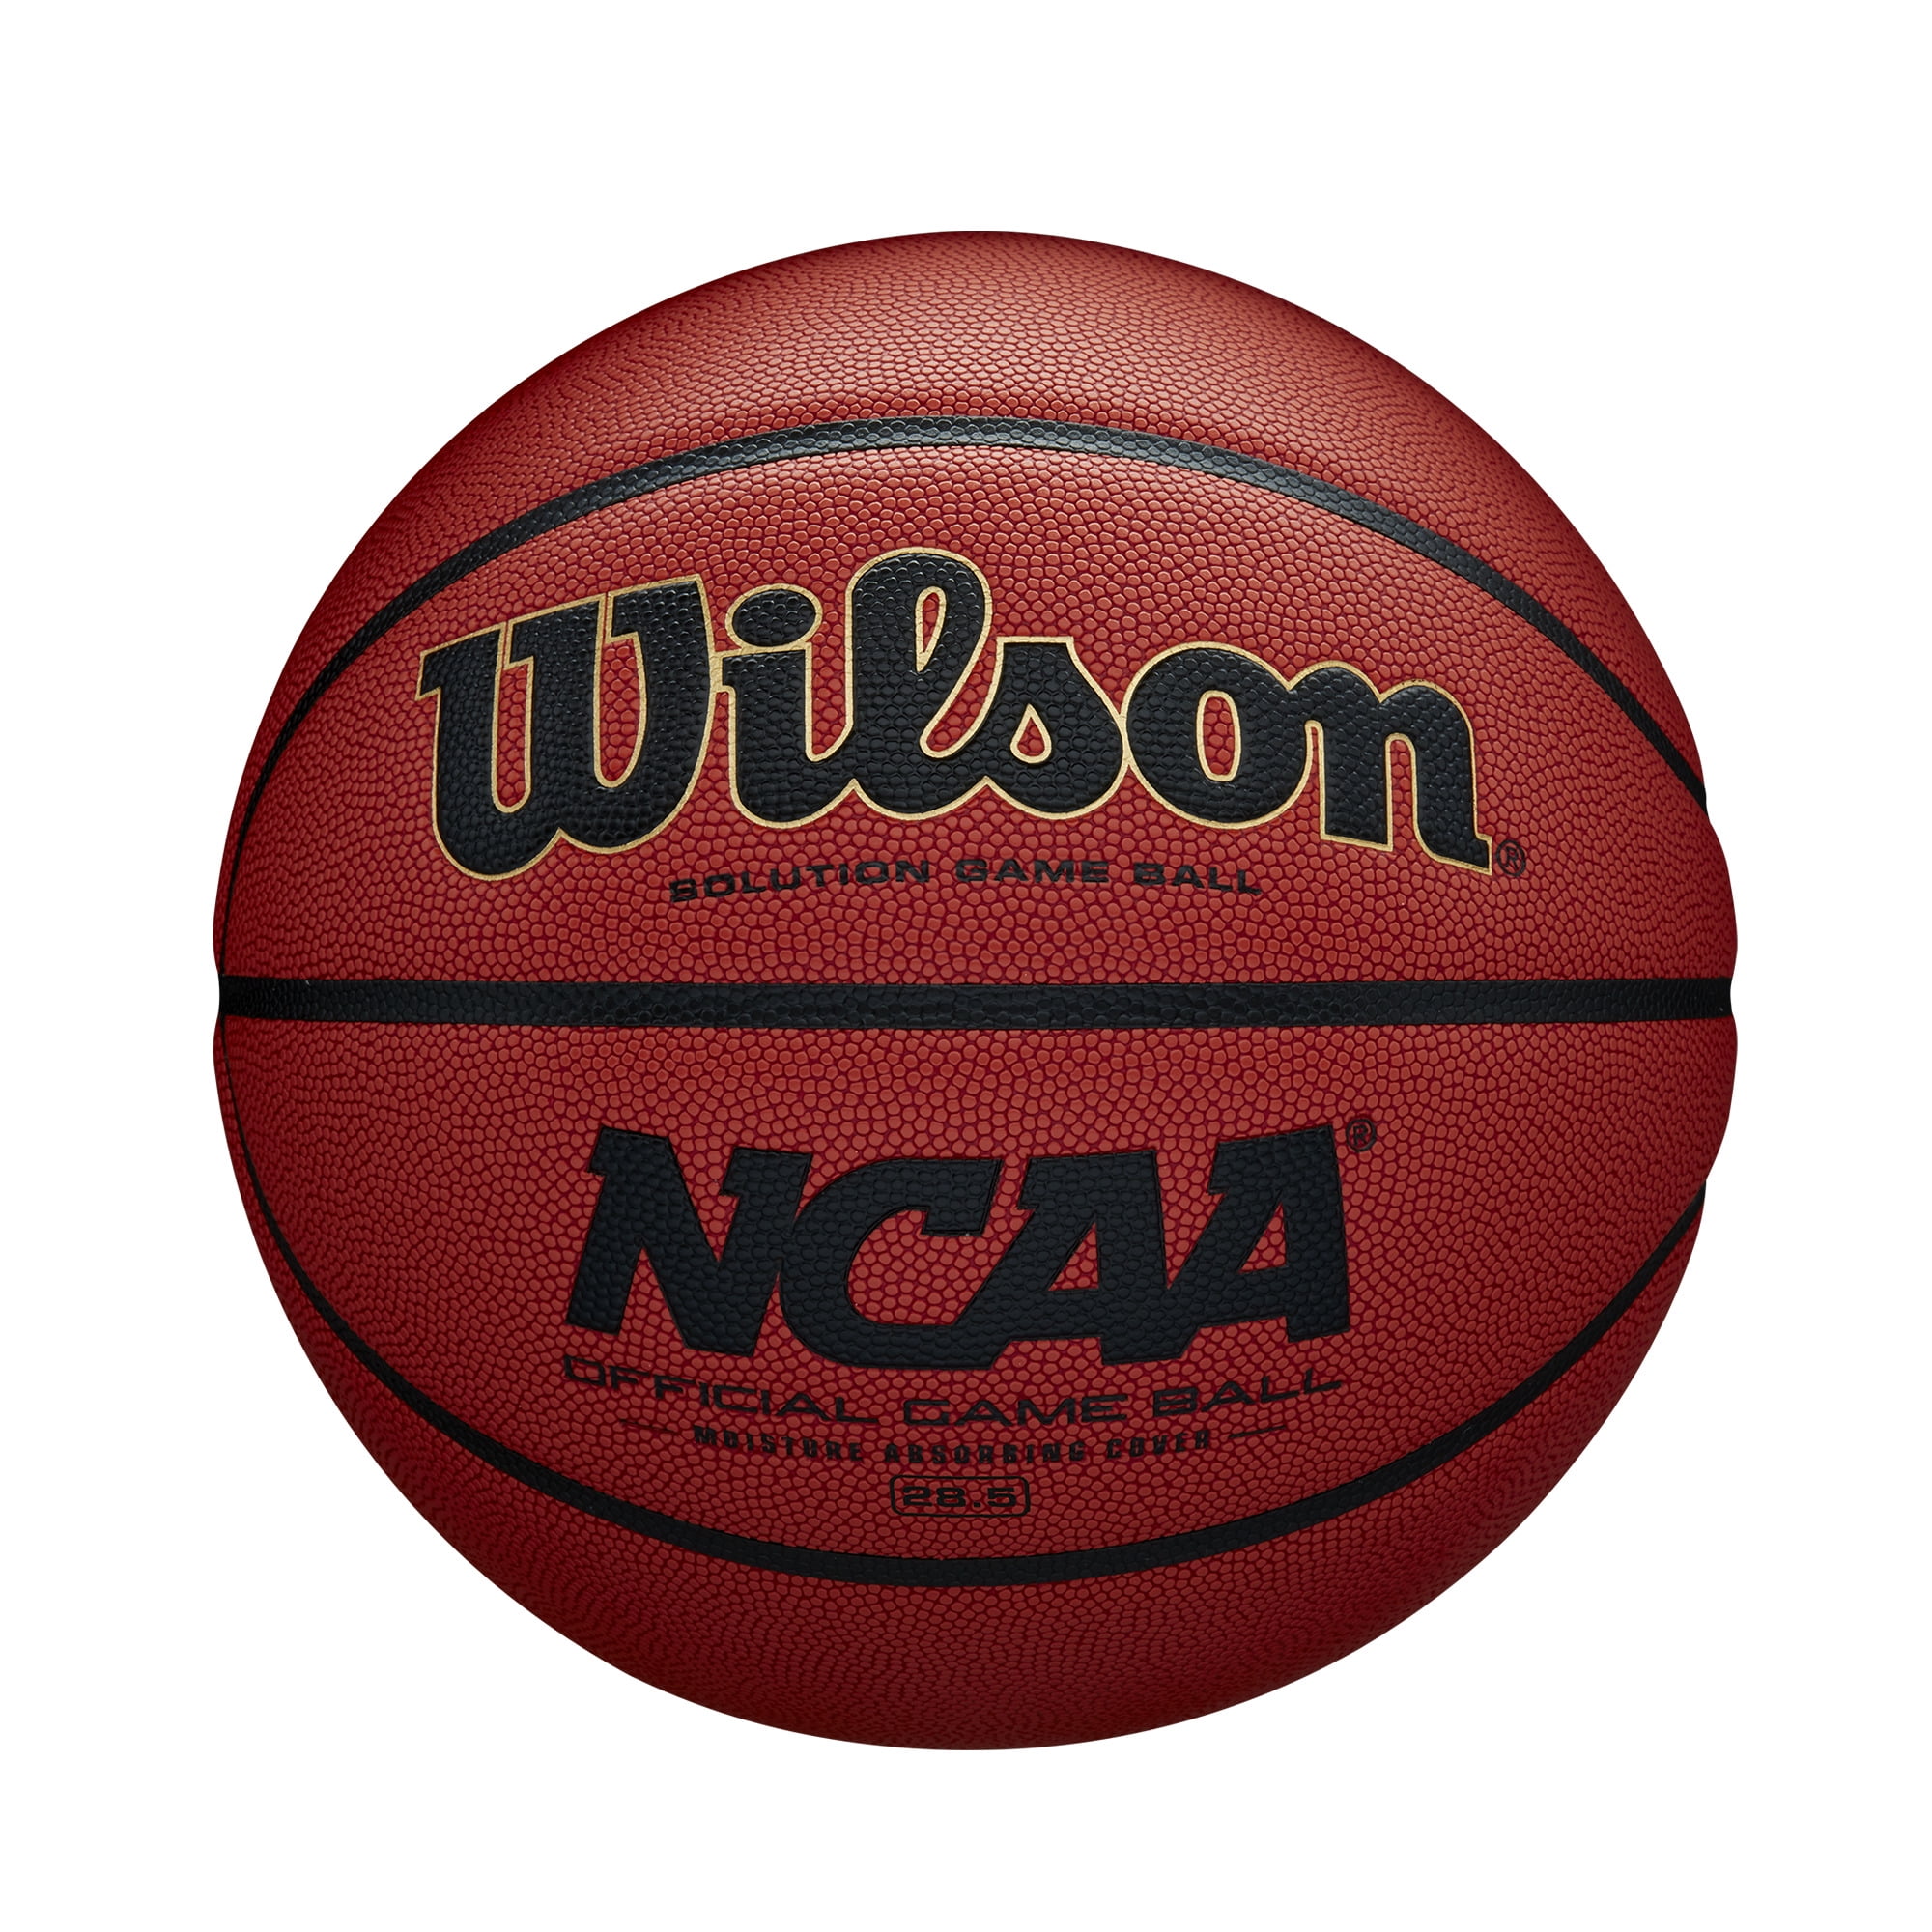 The Rock Basketball C2c Composite Women's 28.5 Game Ball for sale online 